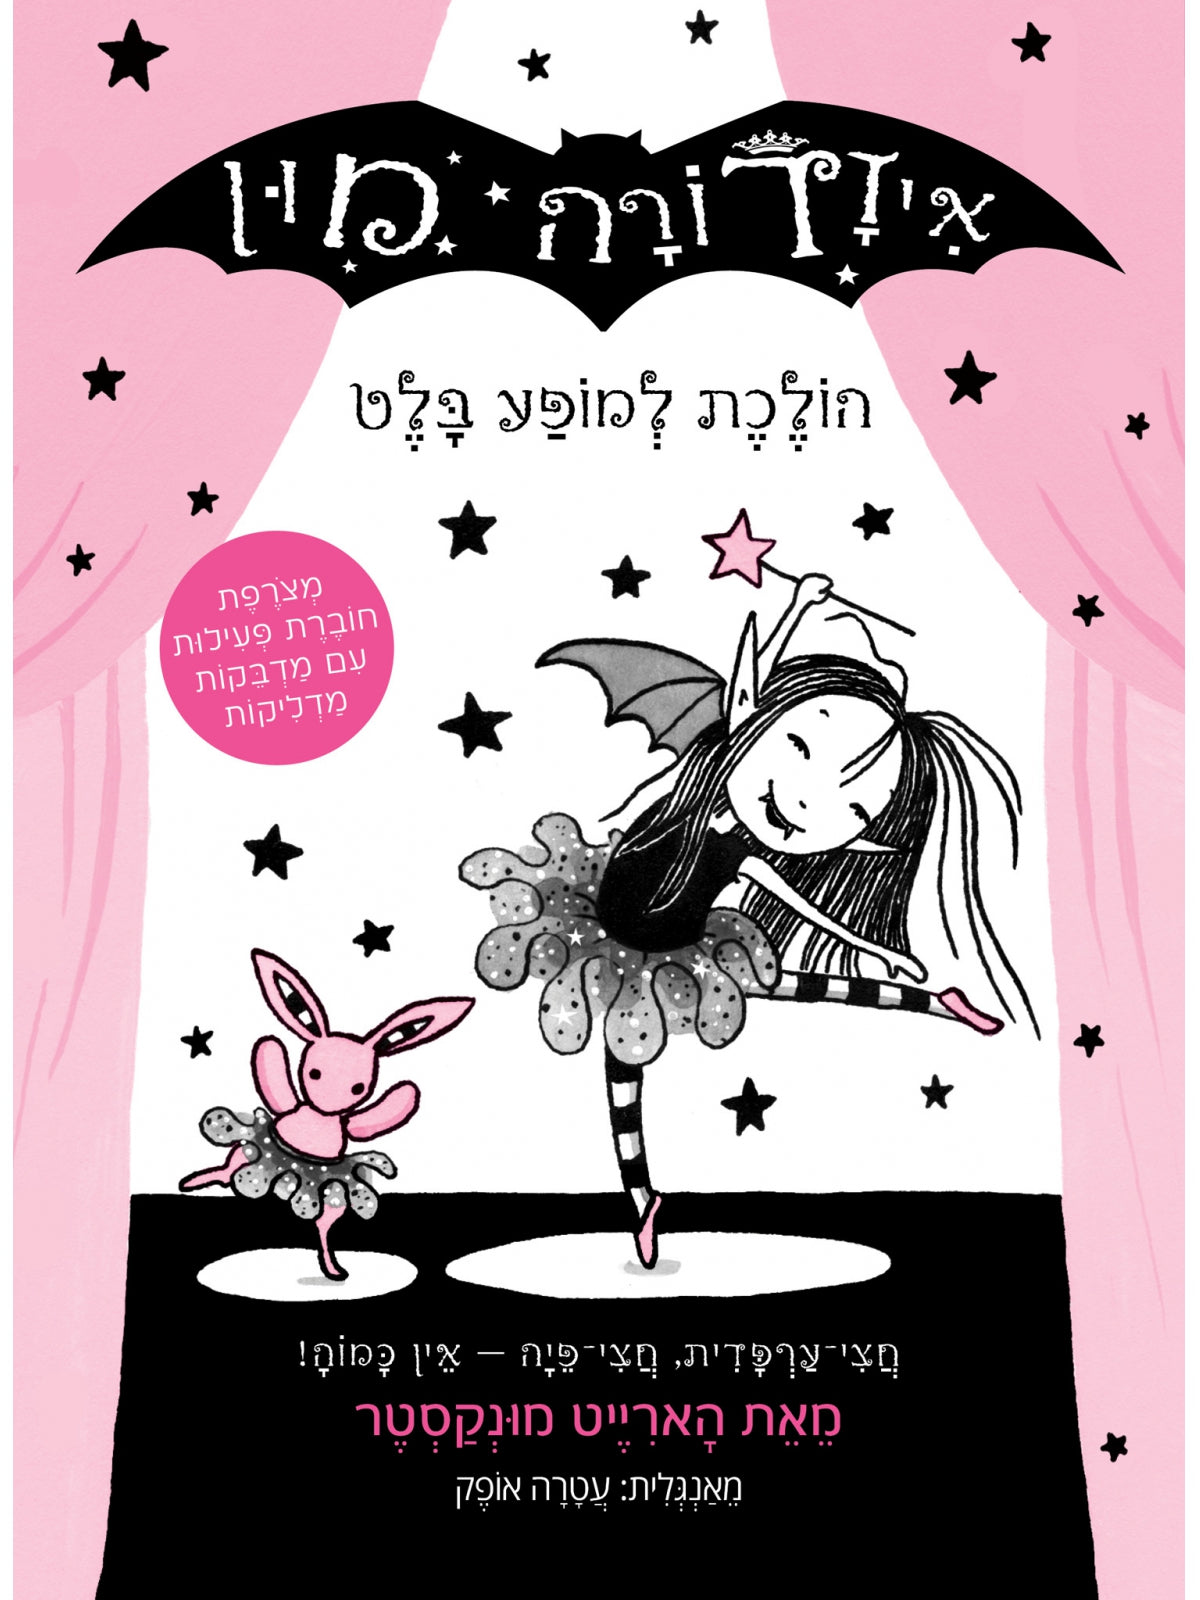 ISADORA MOON 4 GOES TO A BALLET PERFORMANCE